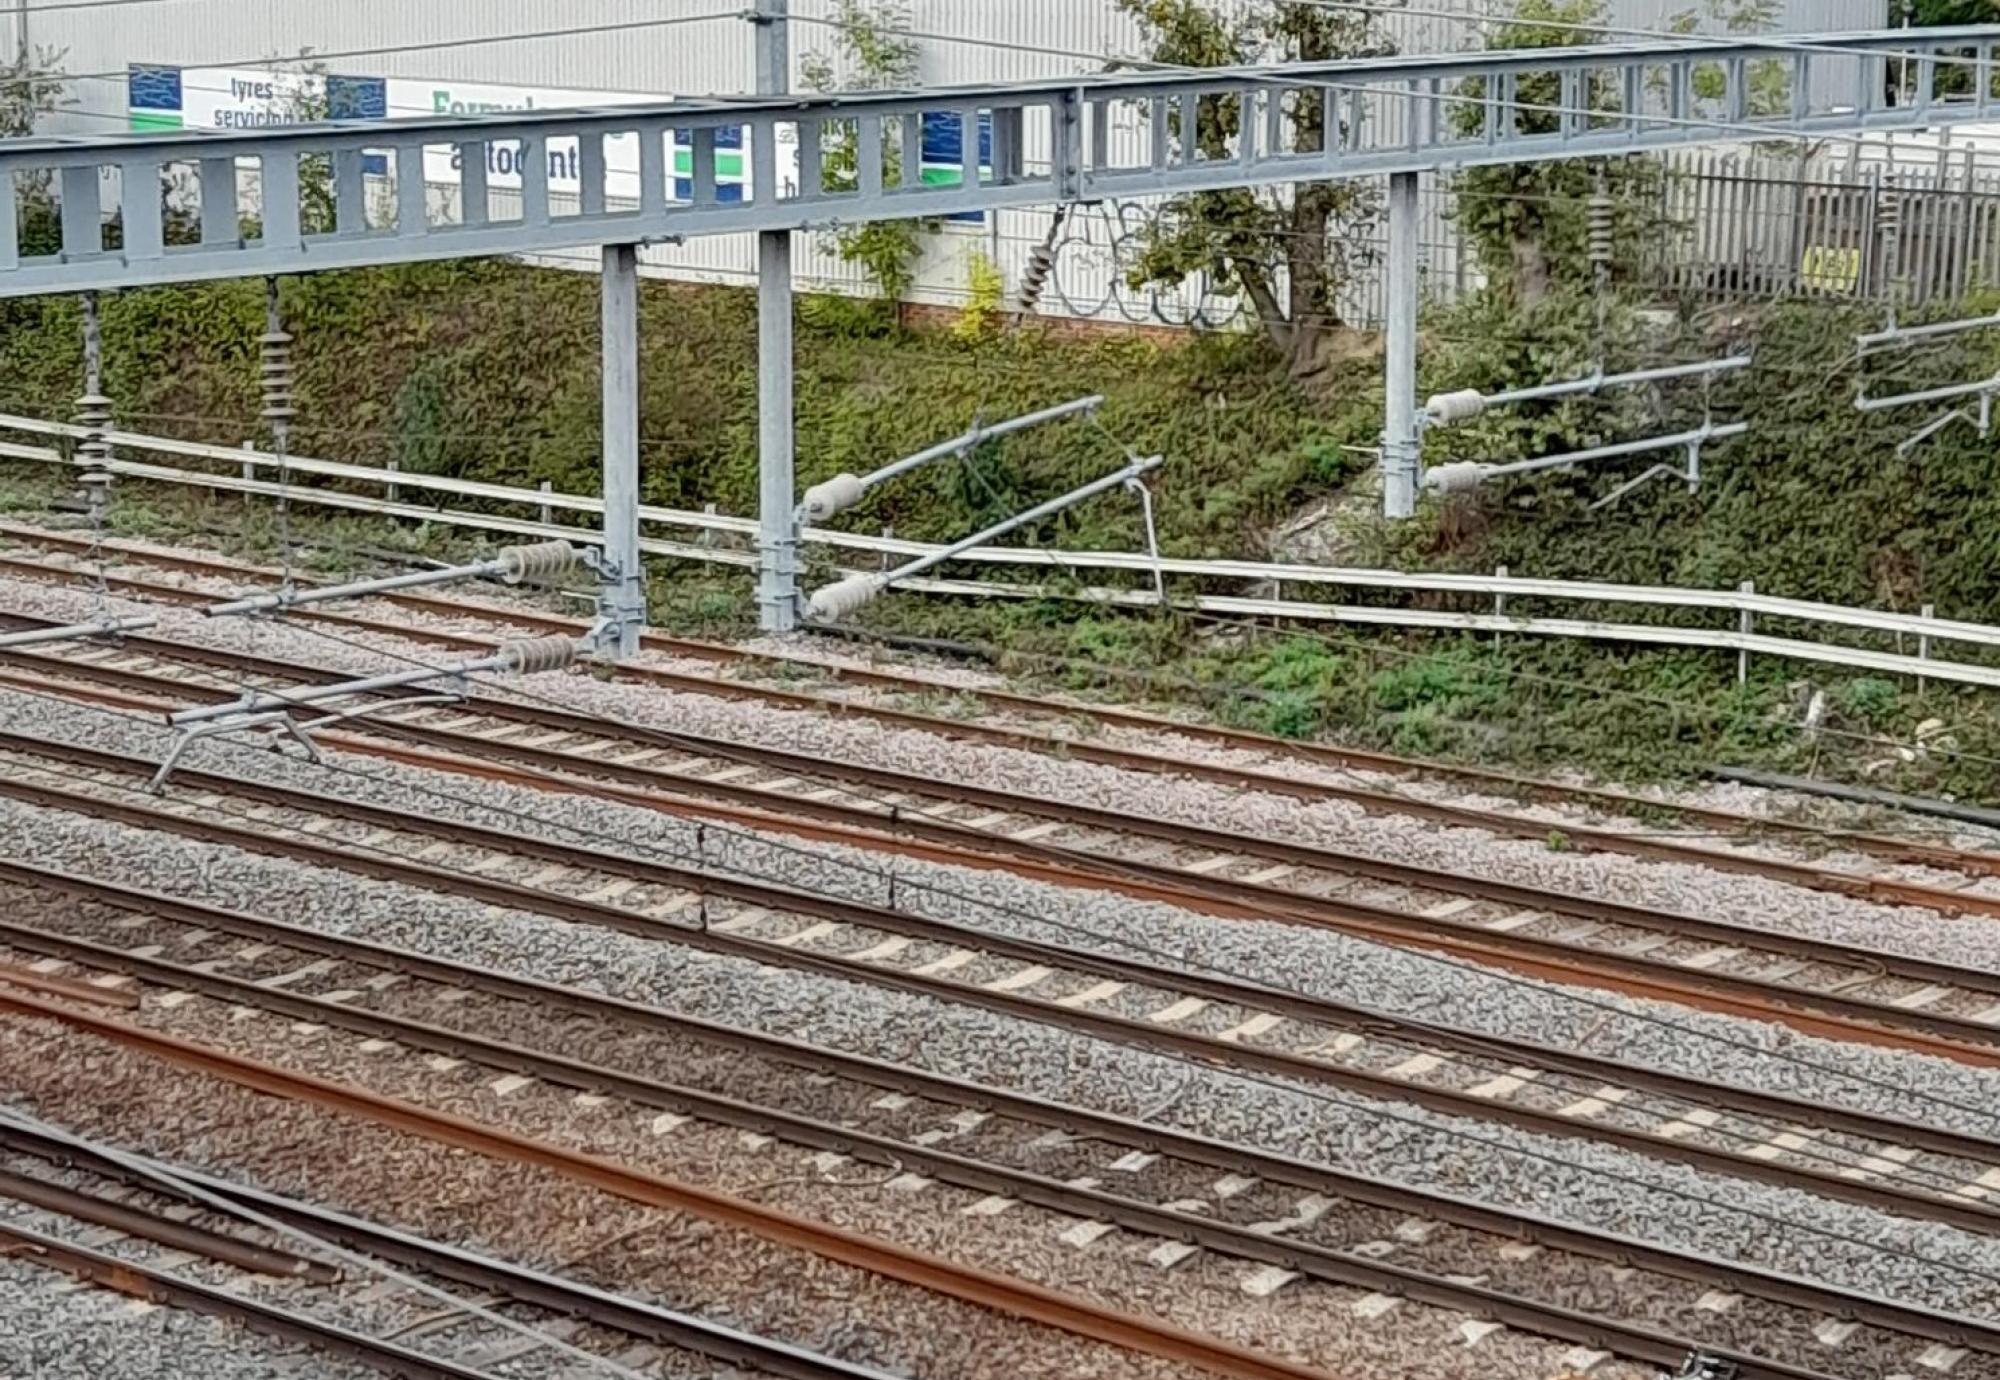 Repairs planned for Stevenage after overhead wire damage, via Network Rail 